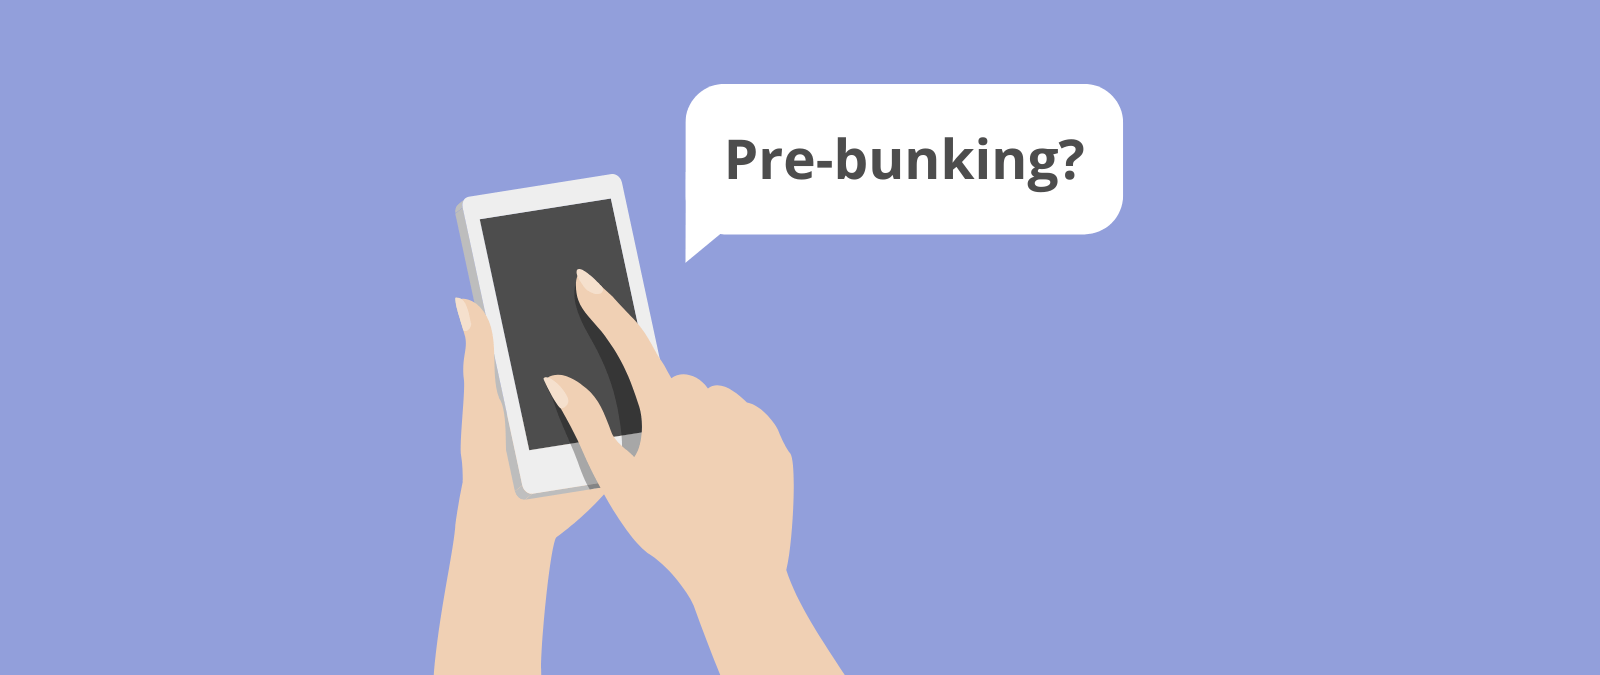 What is pre-bunking and how to fight against disinformation before debunking it